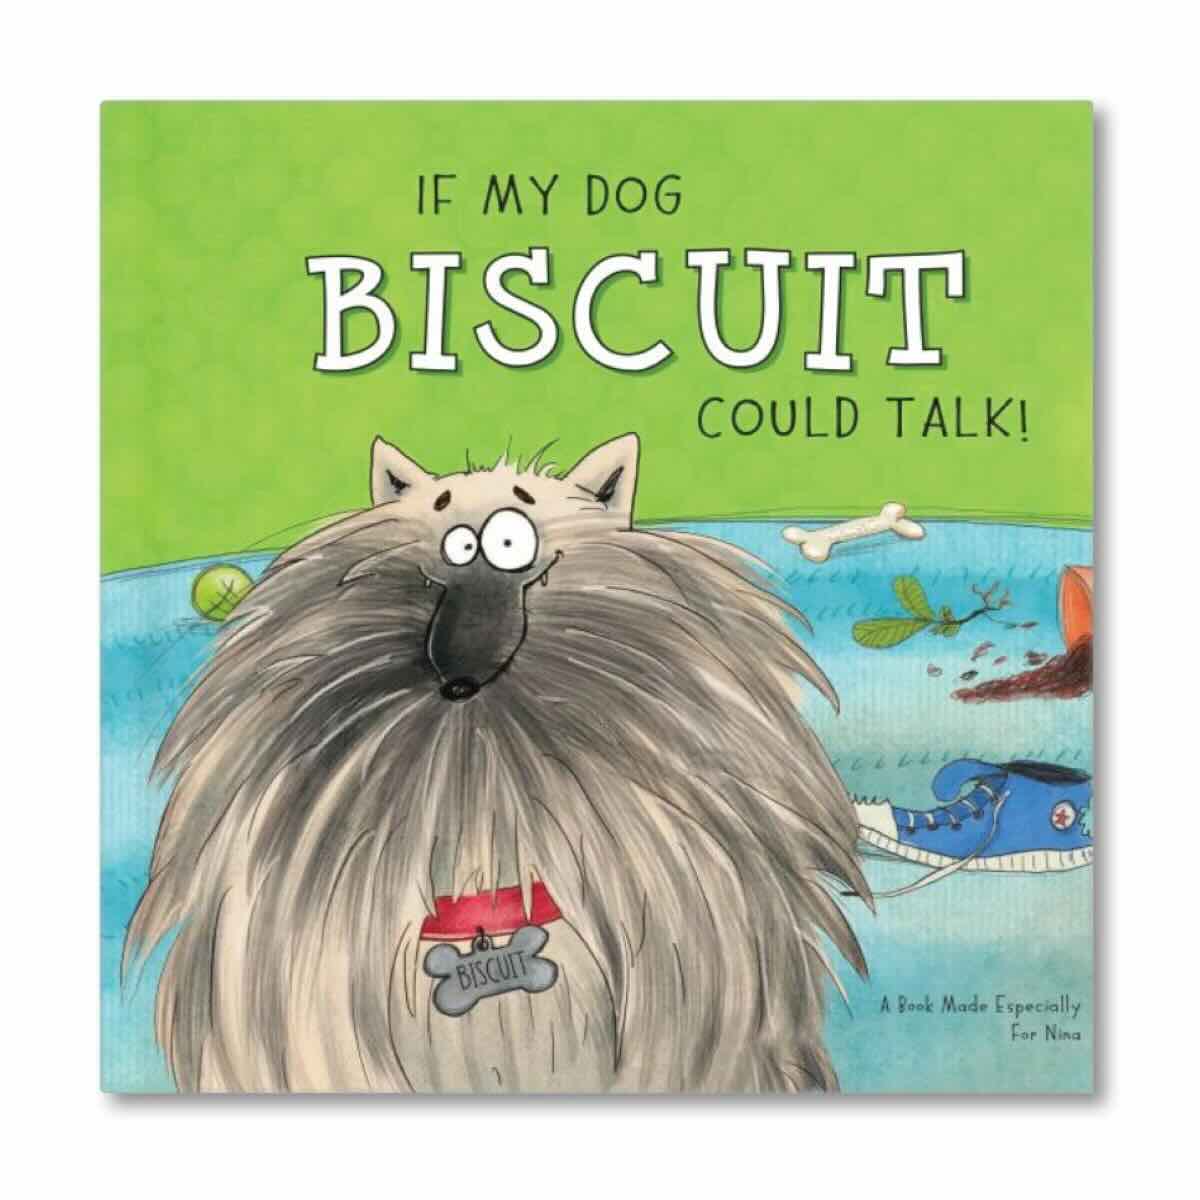 If My Dog Could Talk Personalized book by ISeeMe Books customized and whose title saye: "If May Dog Biscuit Could Talk"